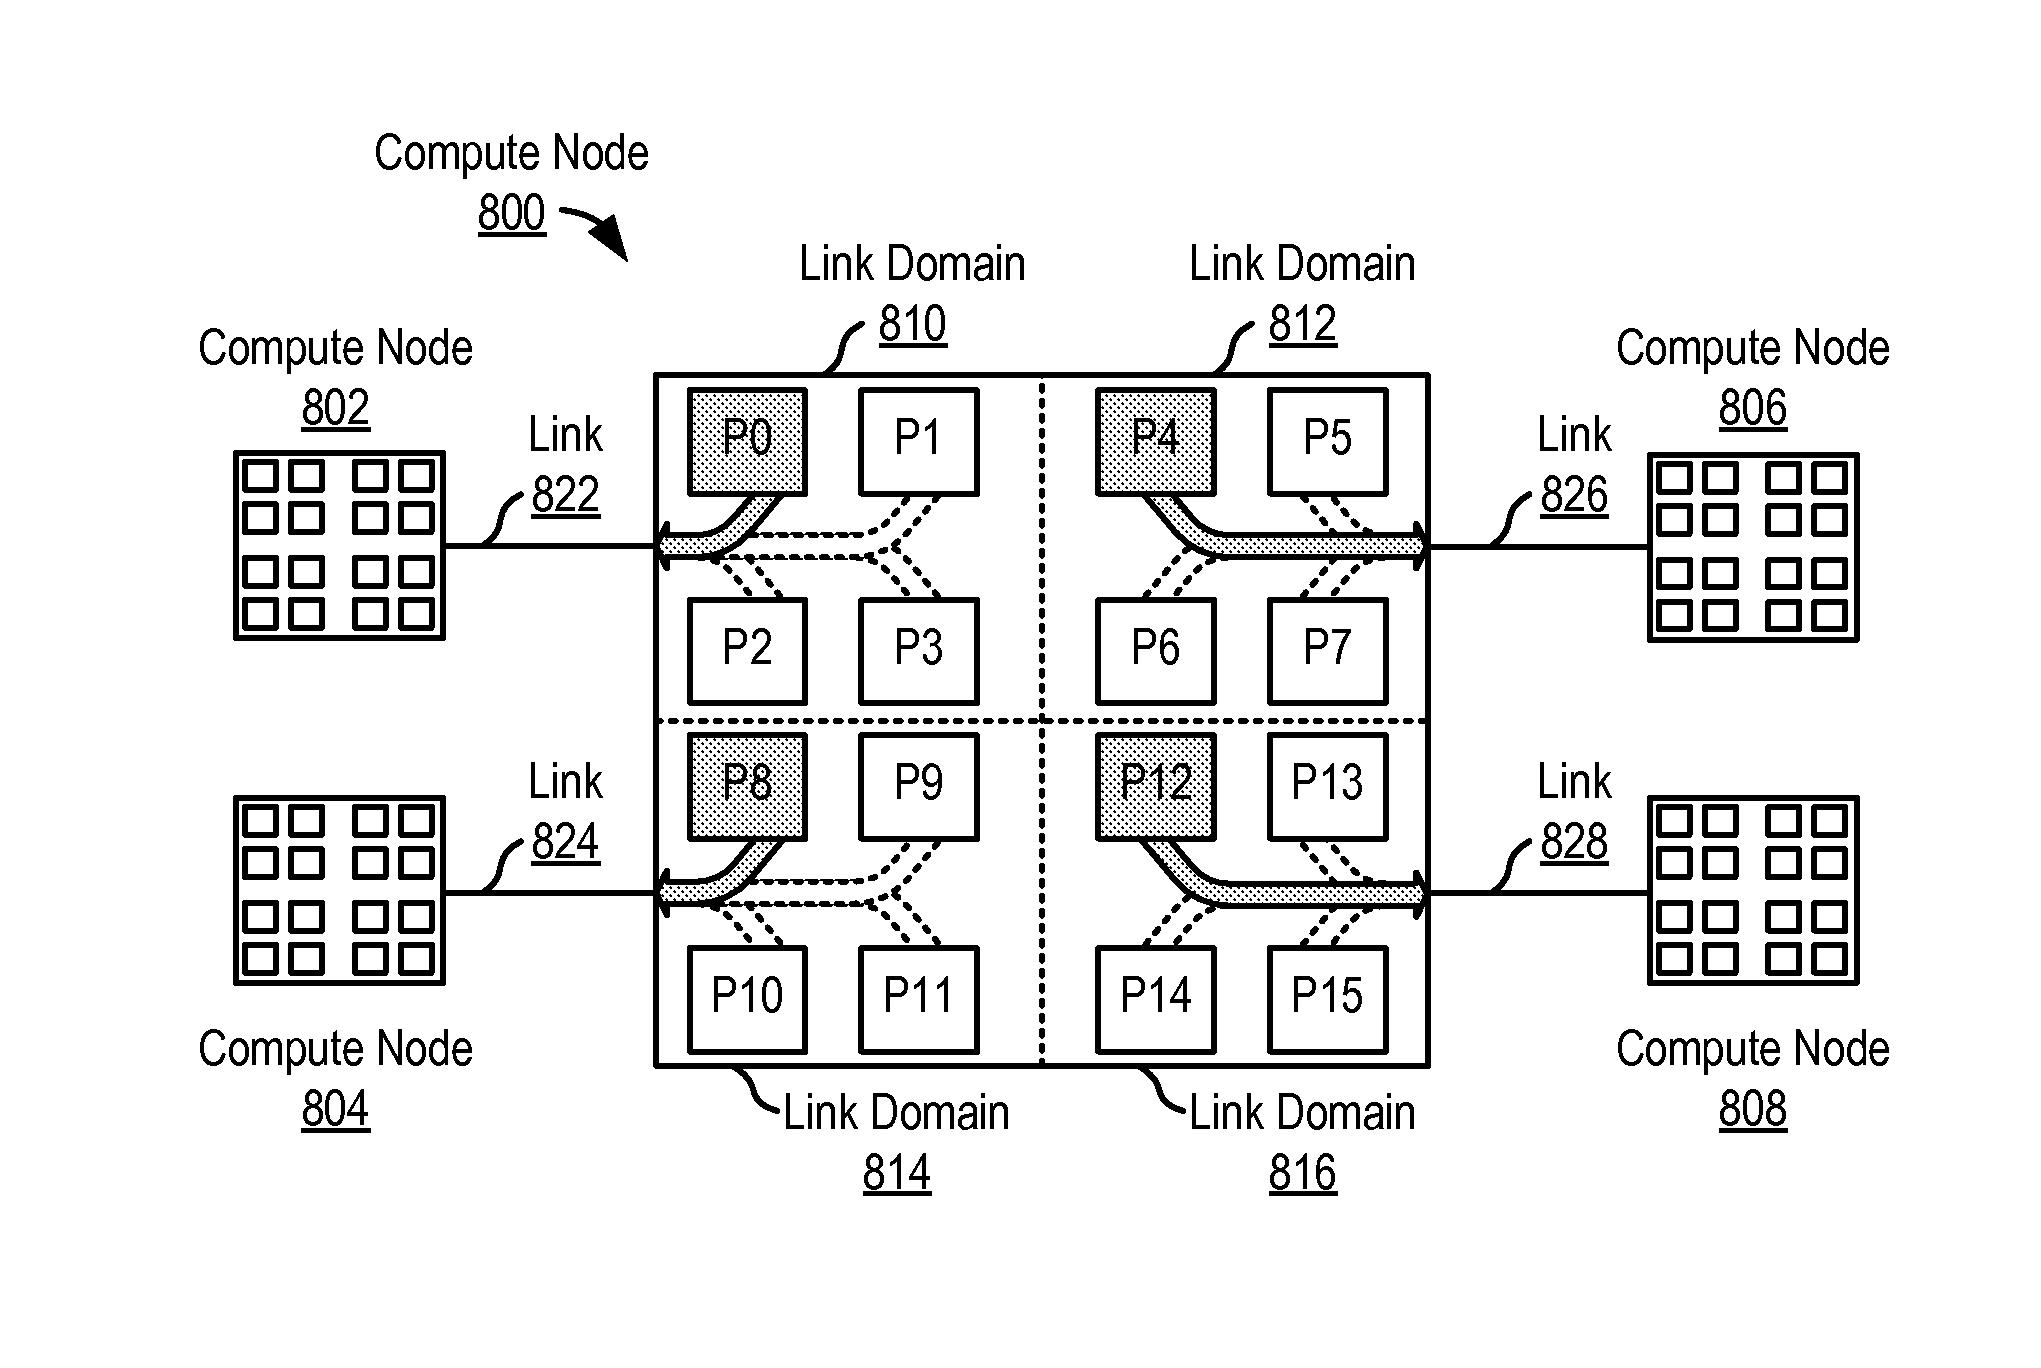 Broadcasting collective operation contributions throughout a parallel computer